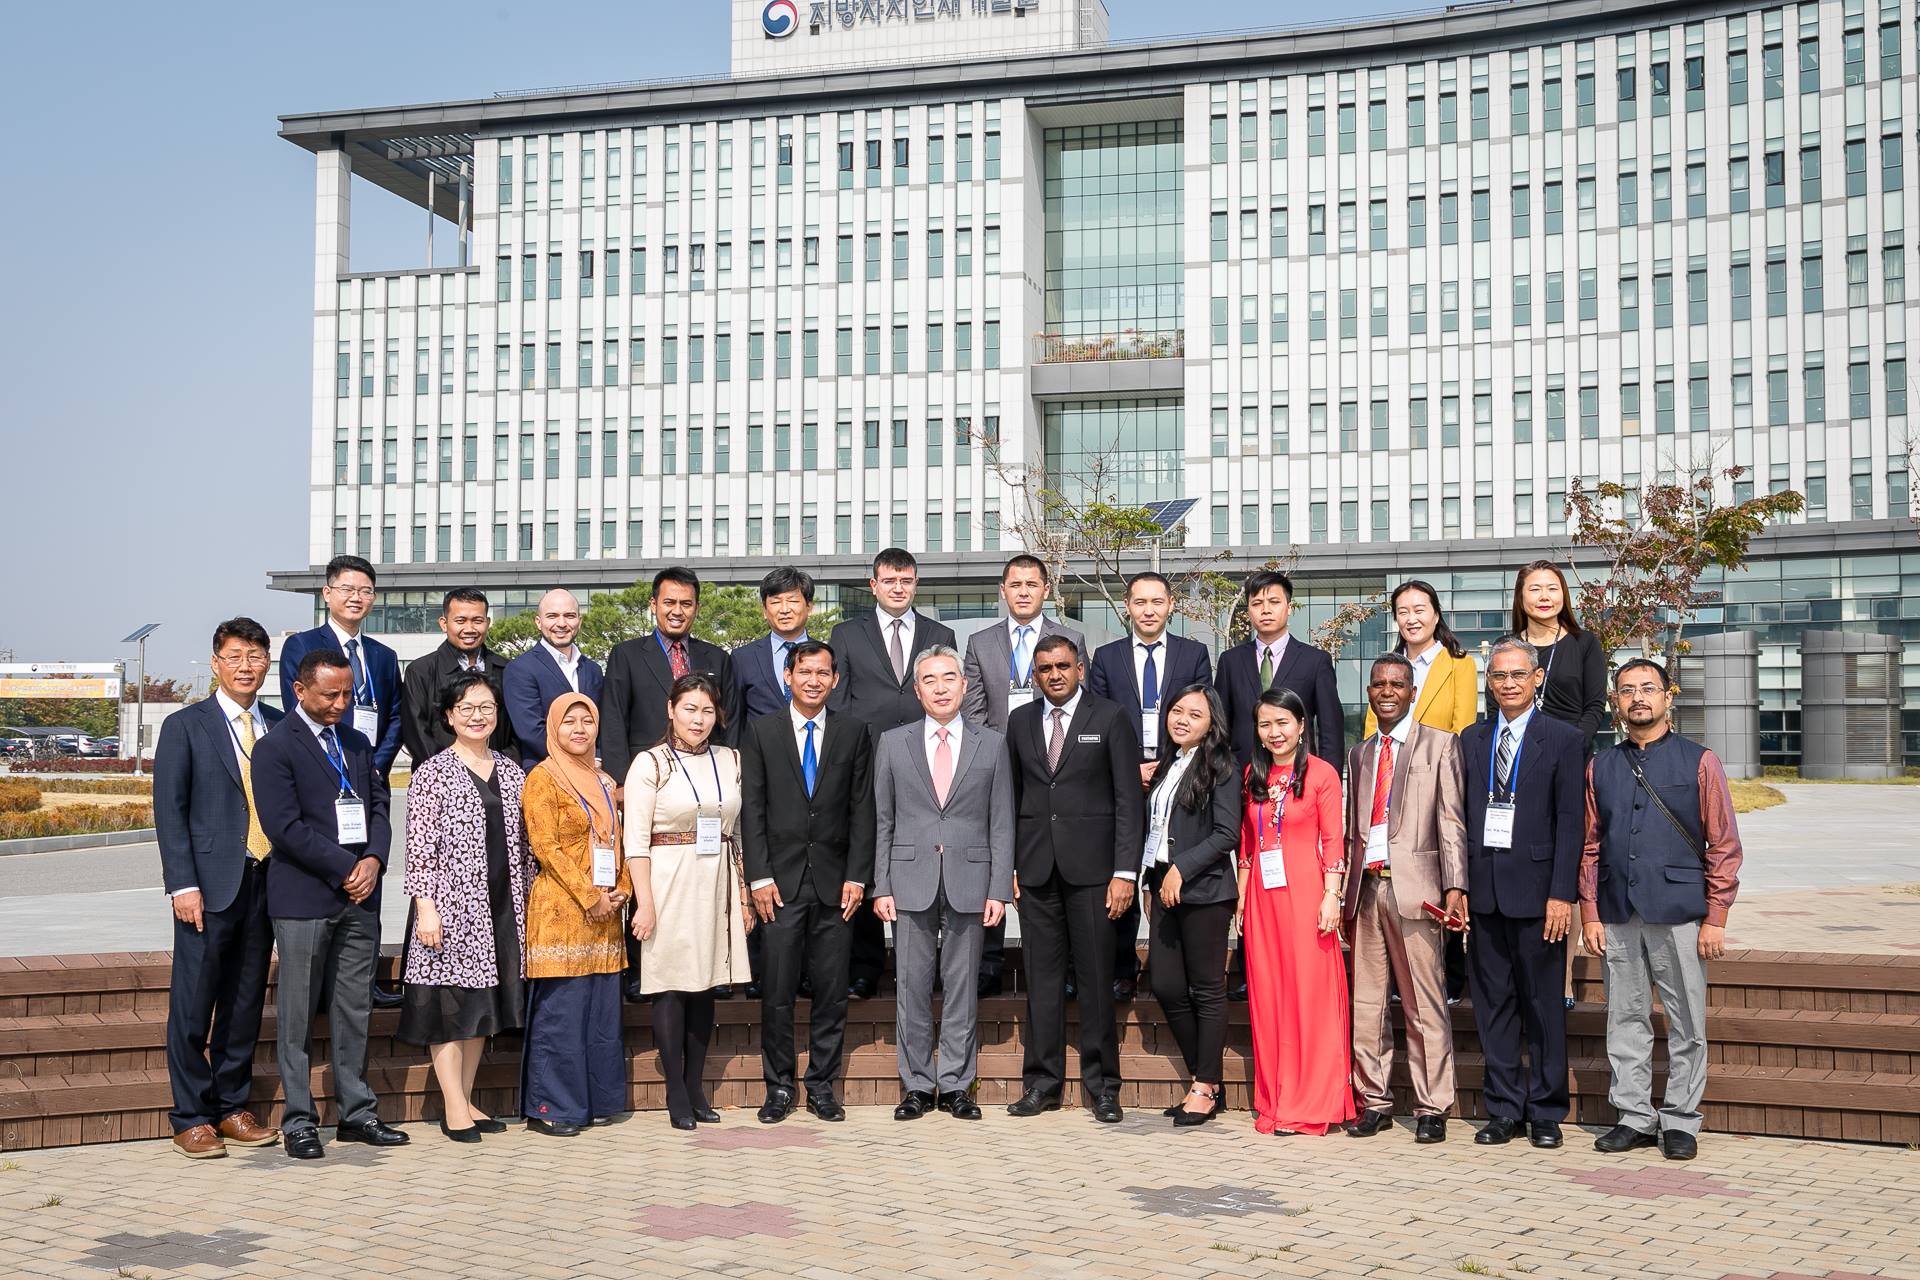 Local government officials from 13 countries converge at LOGODI 큰 이미지[마우스 클릭 시 창닫기]